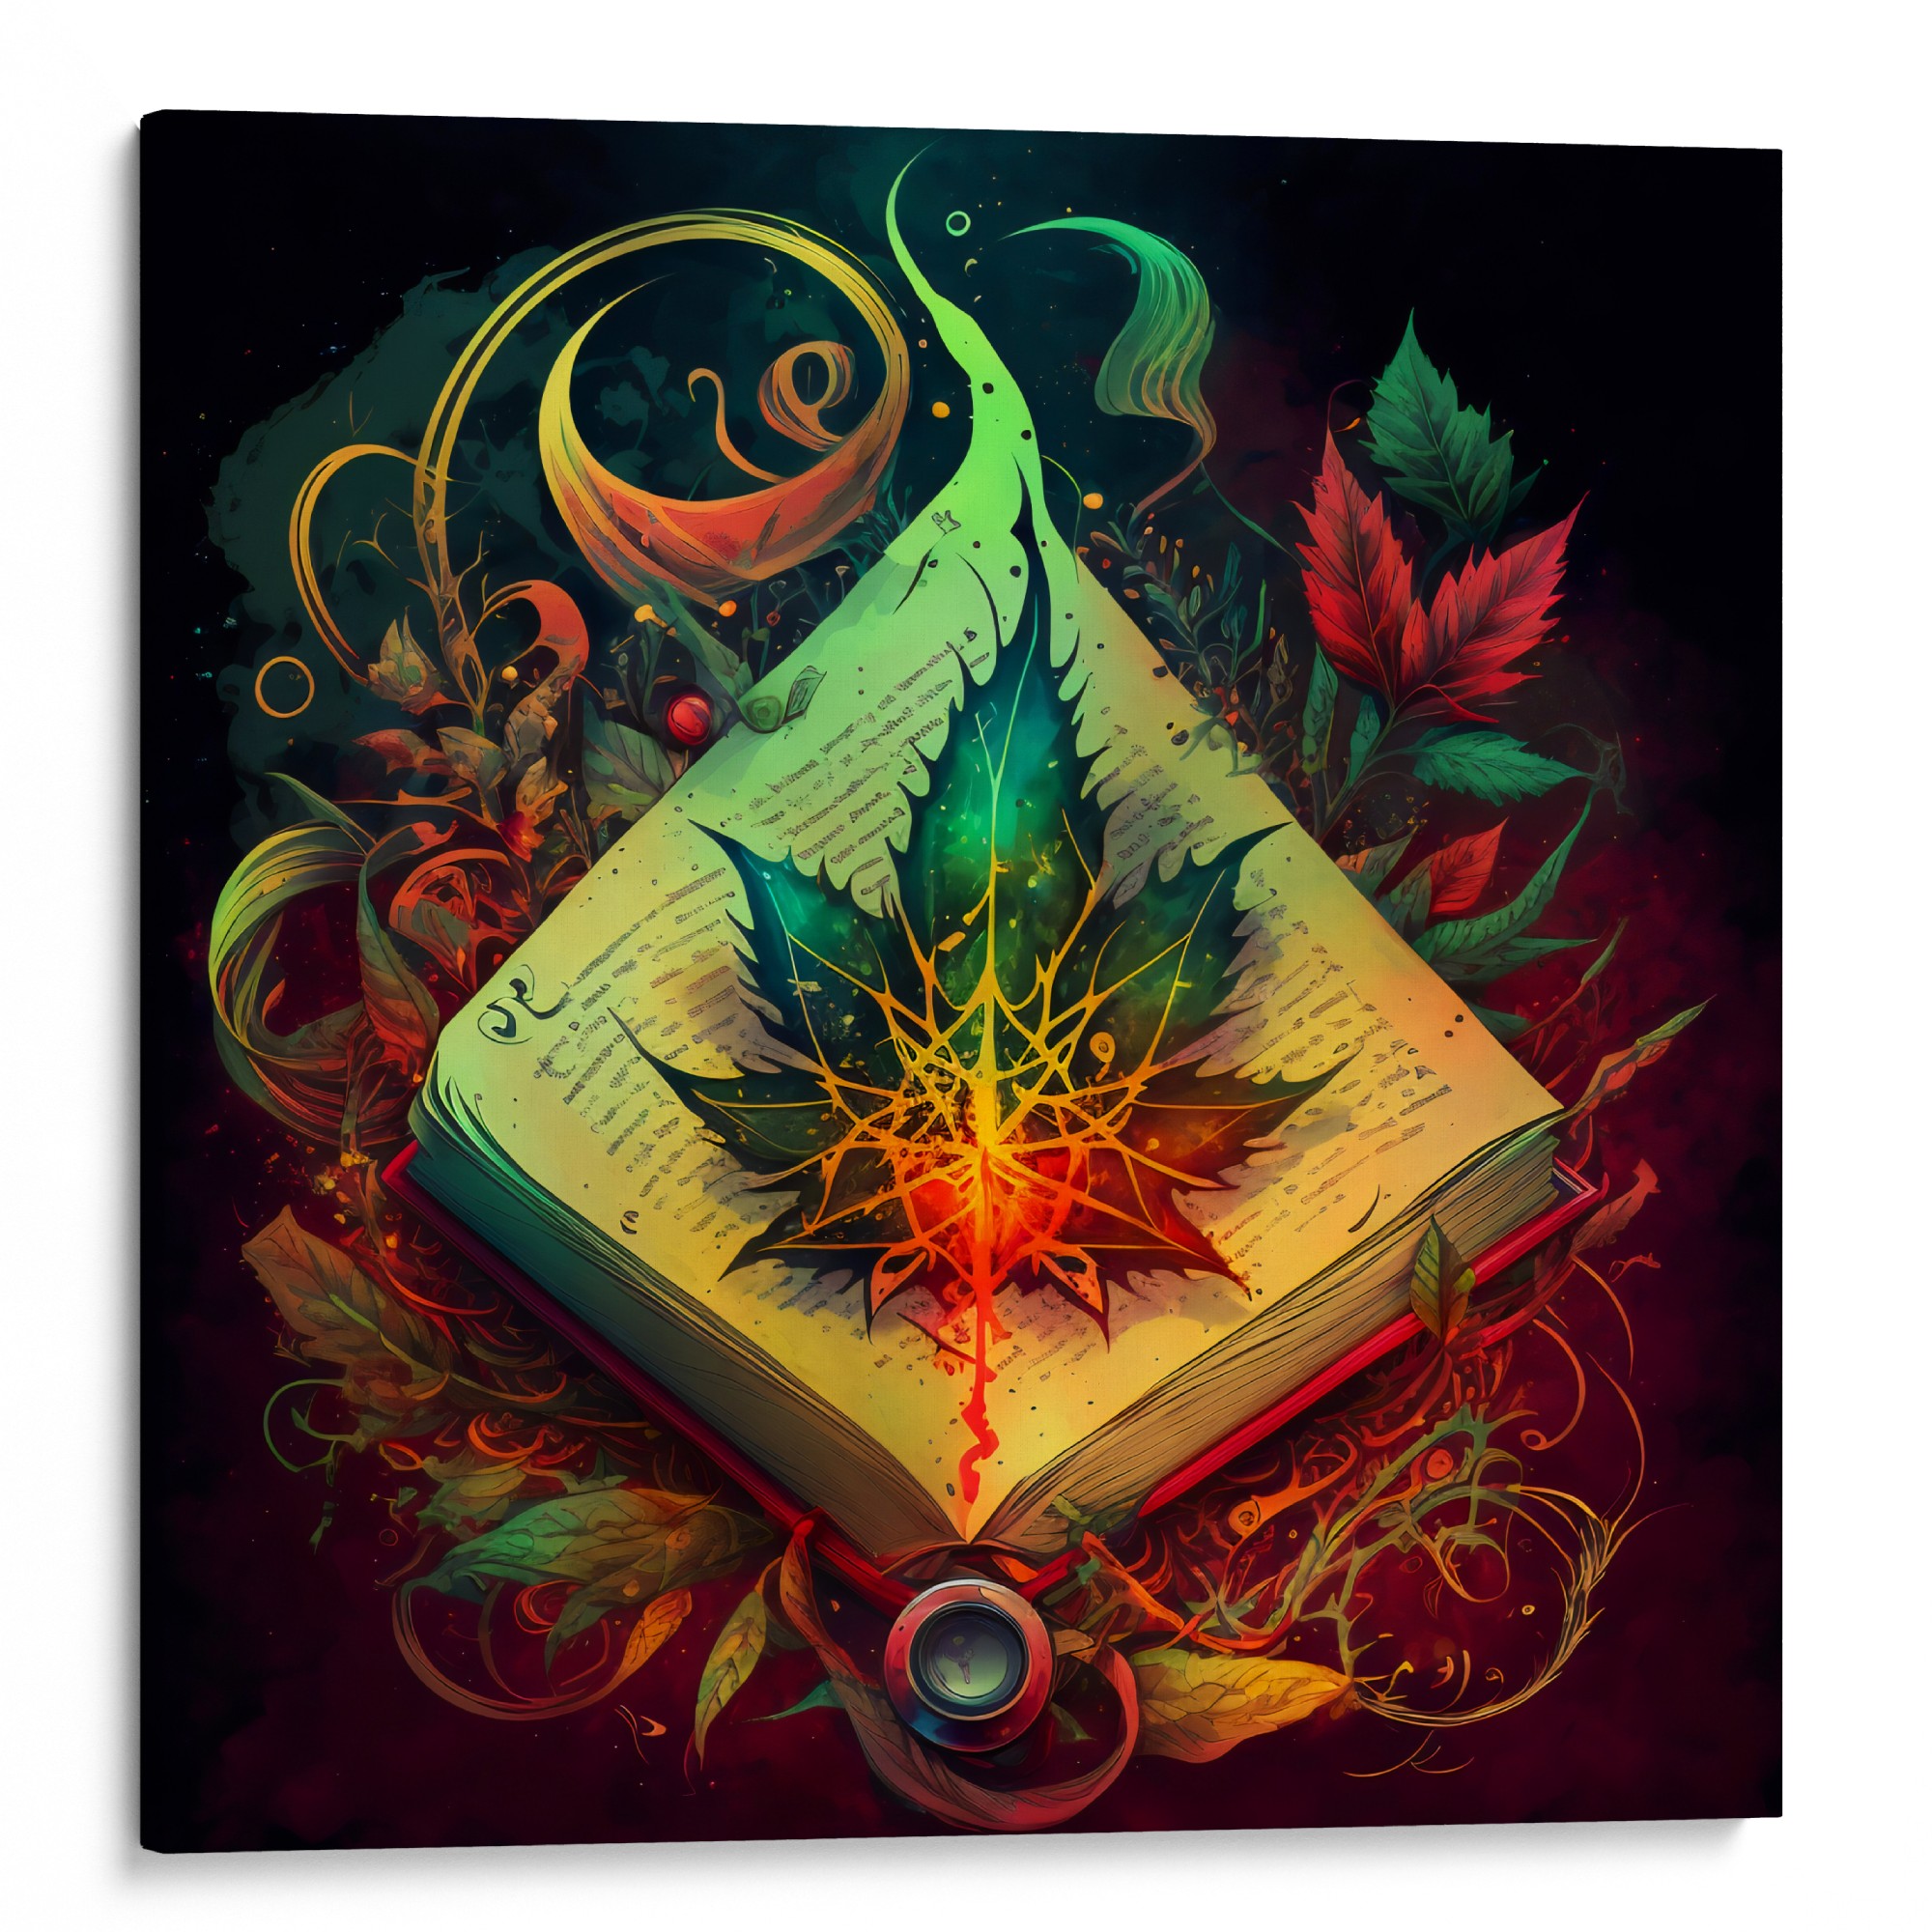 ALCHEMY Canvas - Riddle-filled journey captured for the curious.